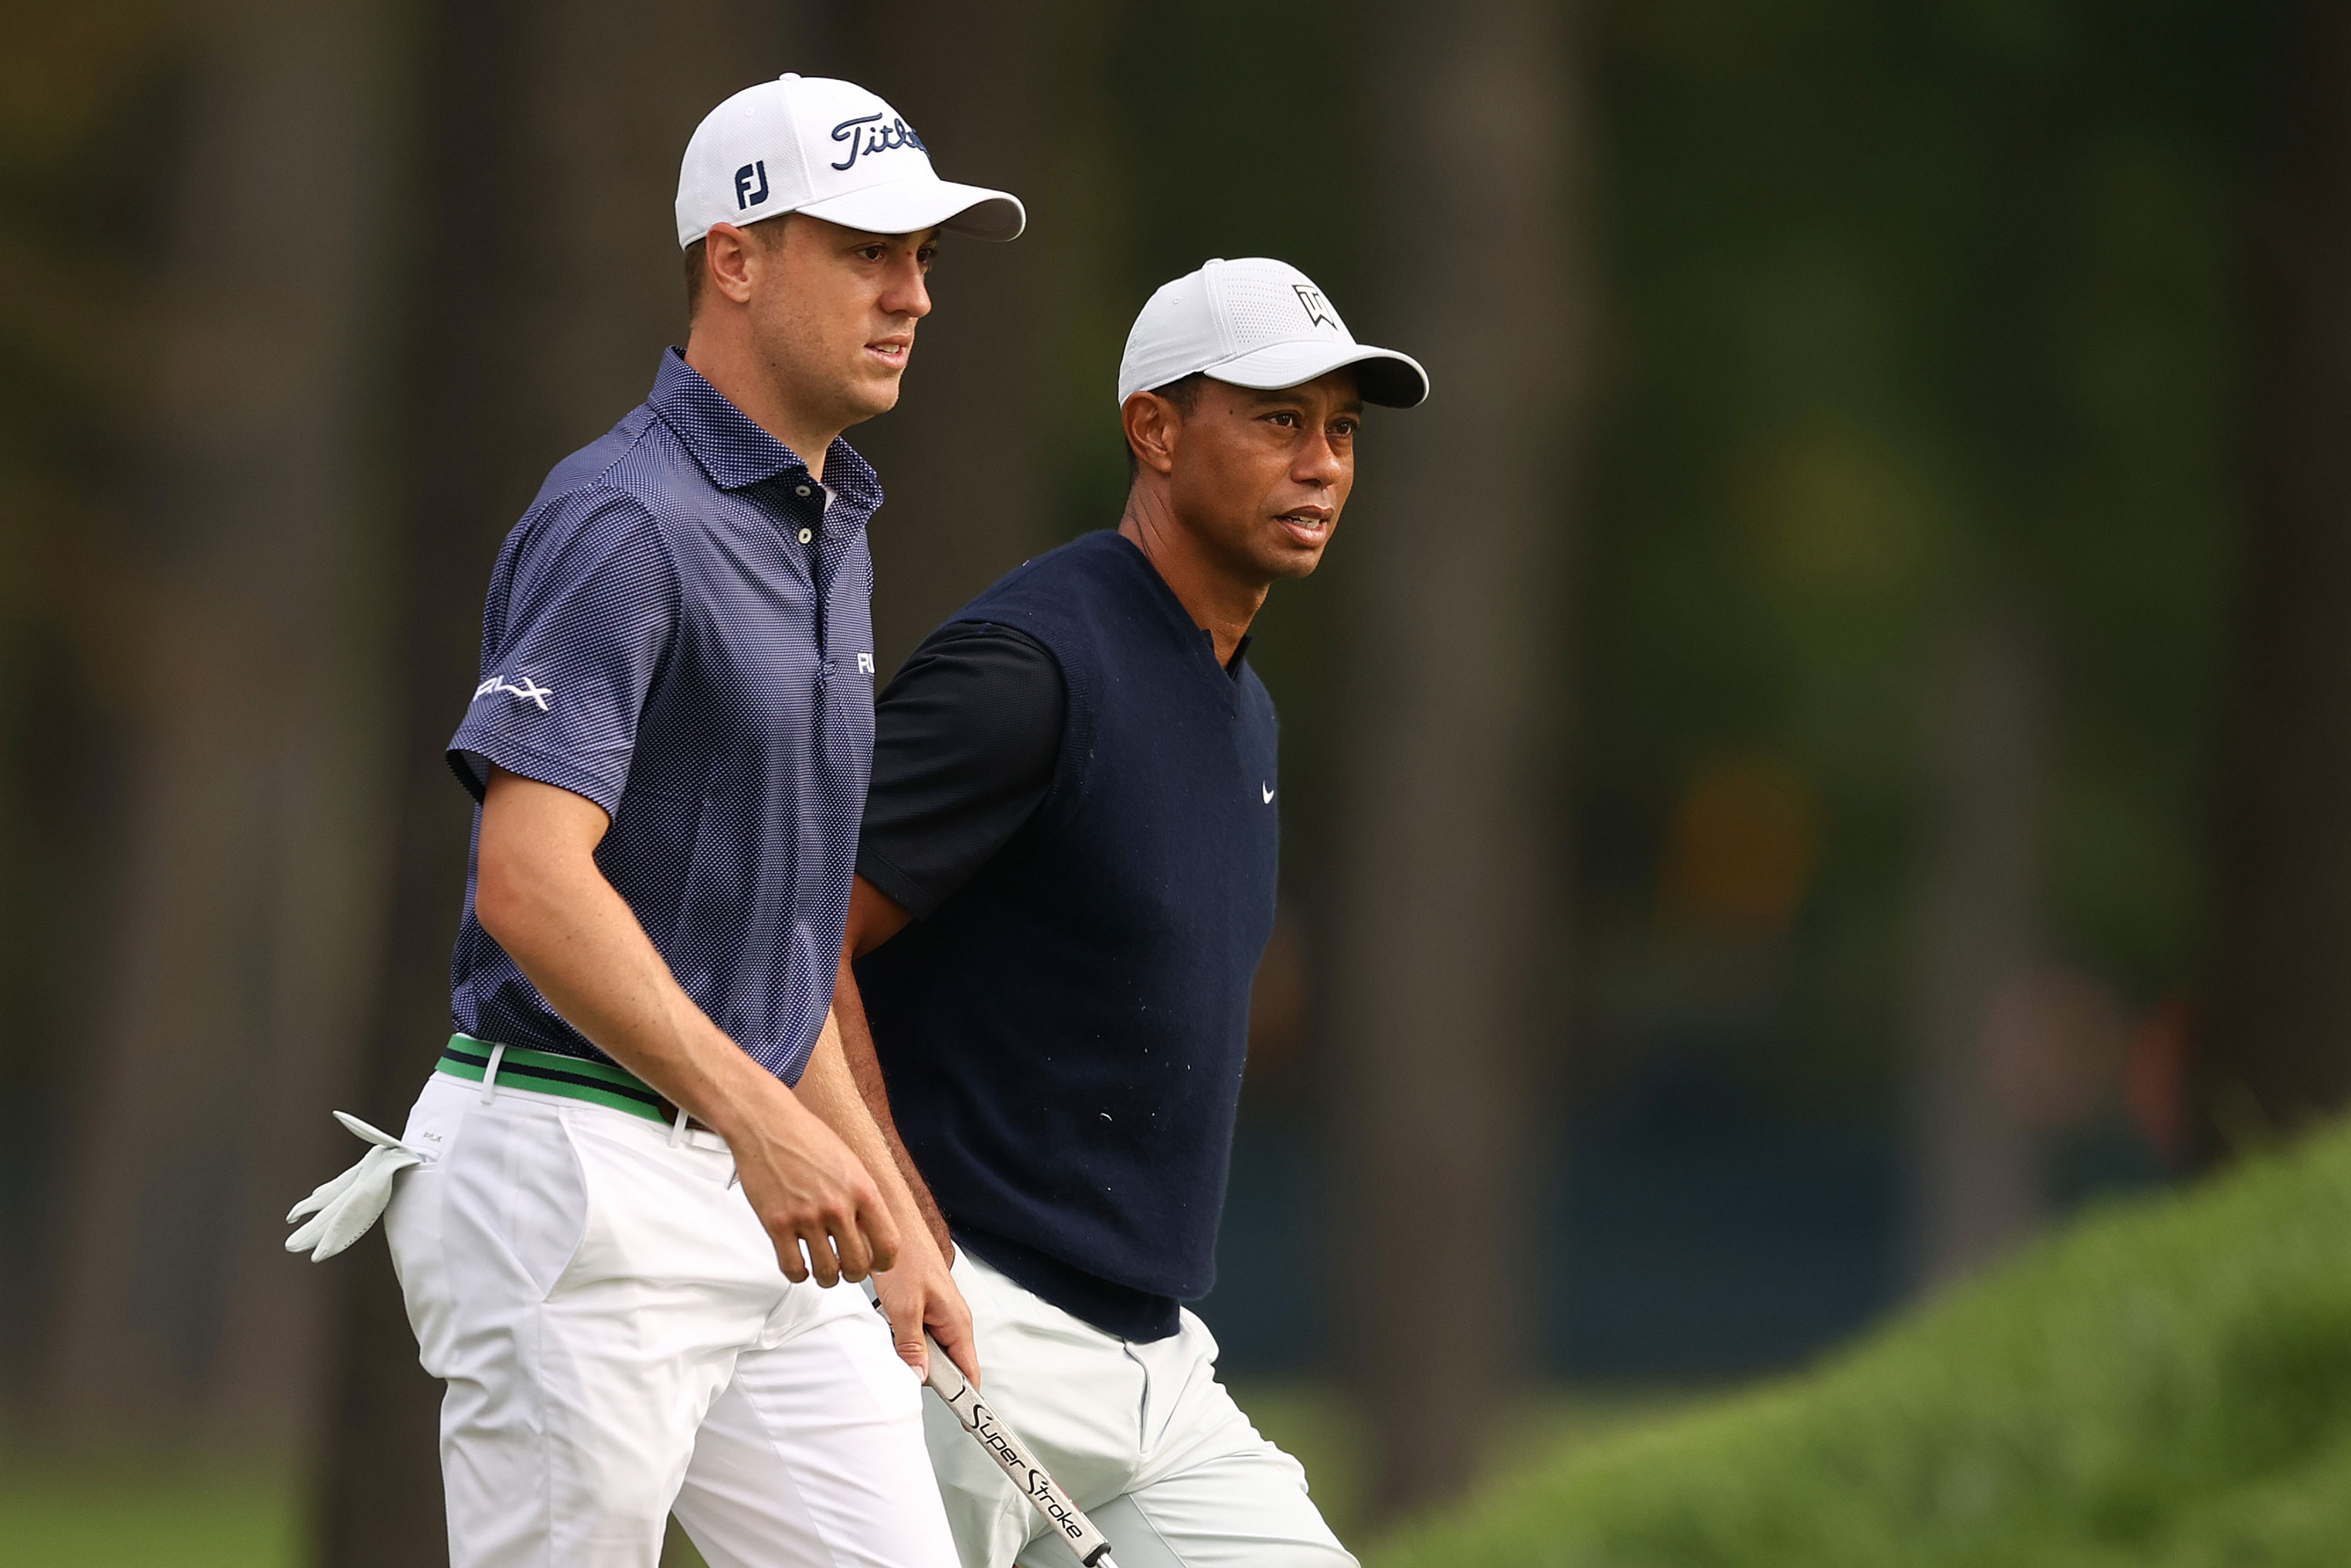 Justin Thomas and Tiger Woods walk together during the U.S. Open on September 17 in Mamaroneck, New York.